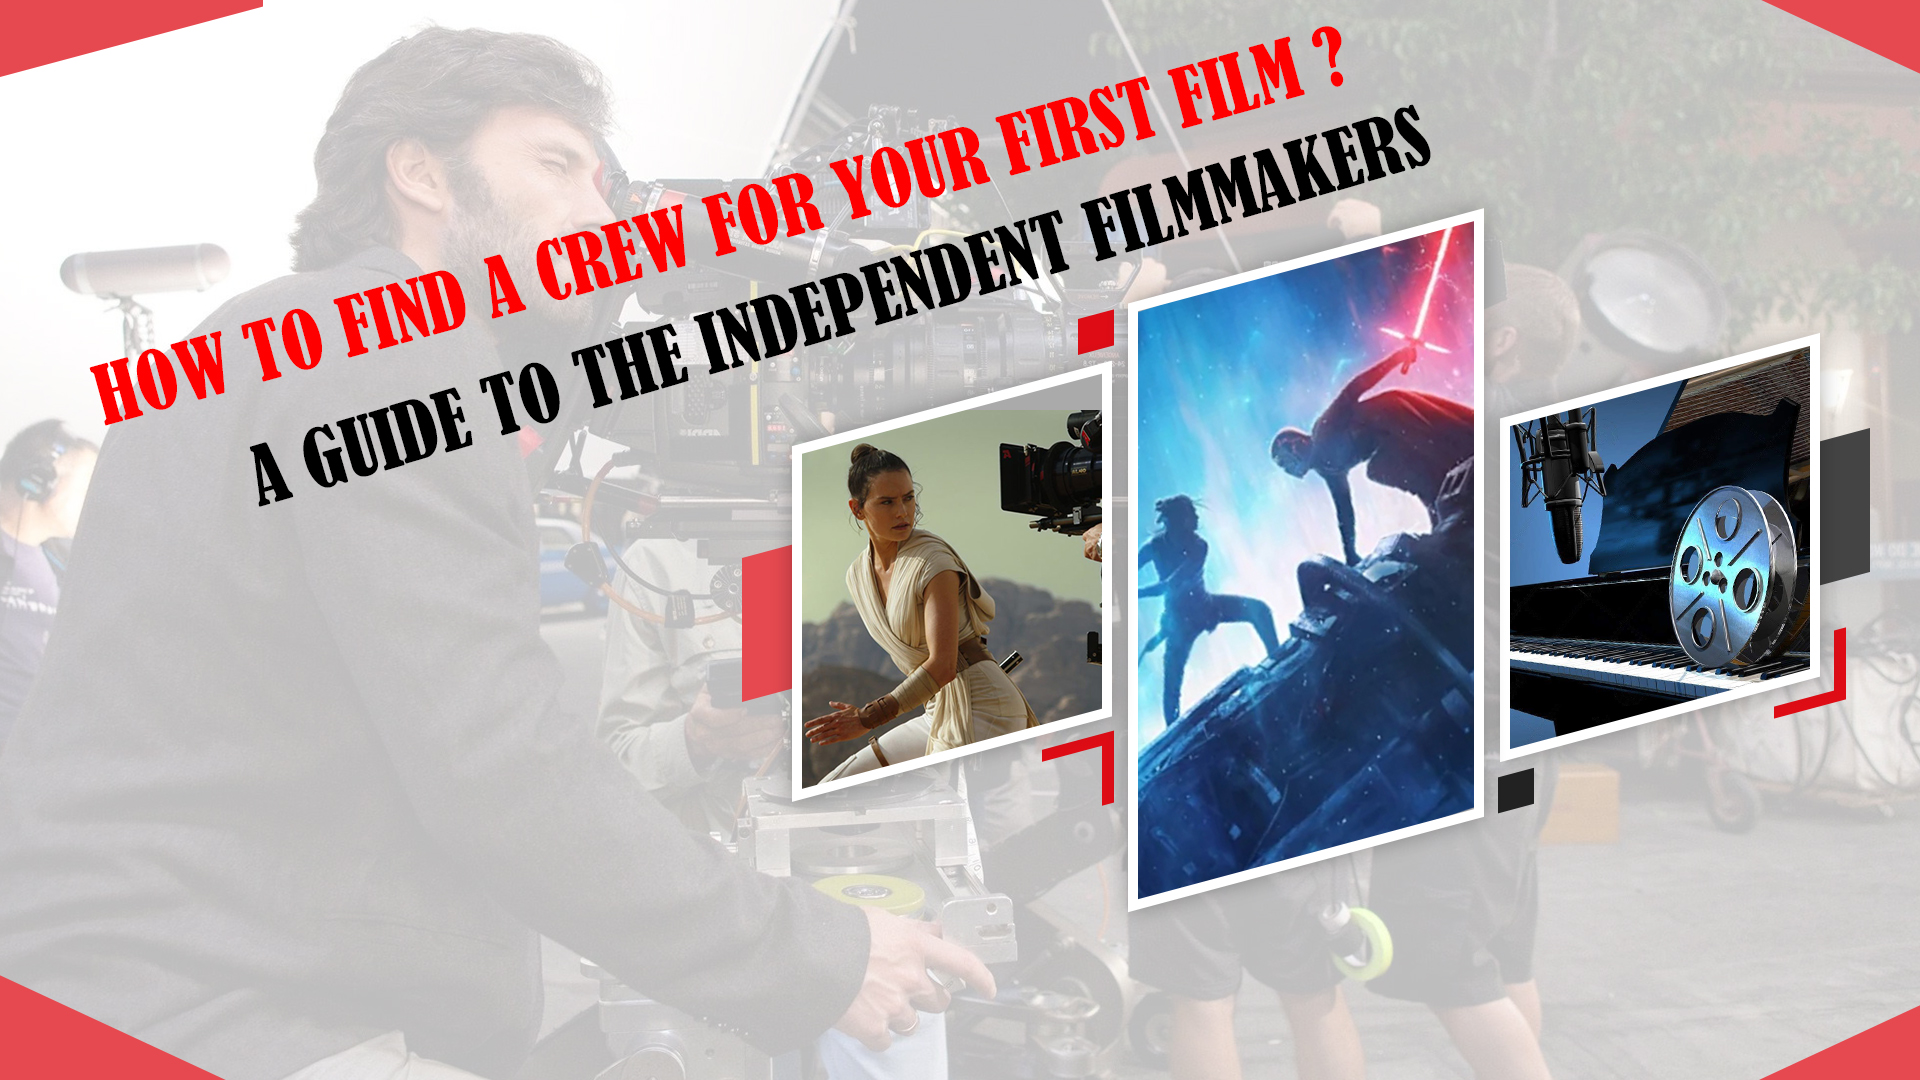 How to find a crew for your first film: A guide to the independent filmmakers